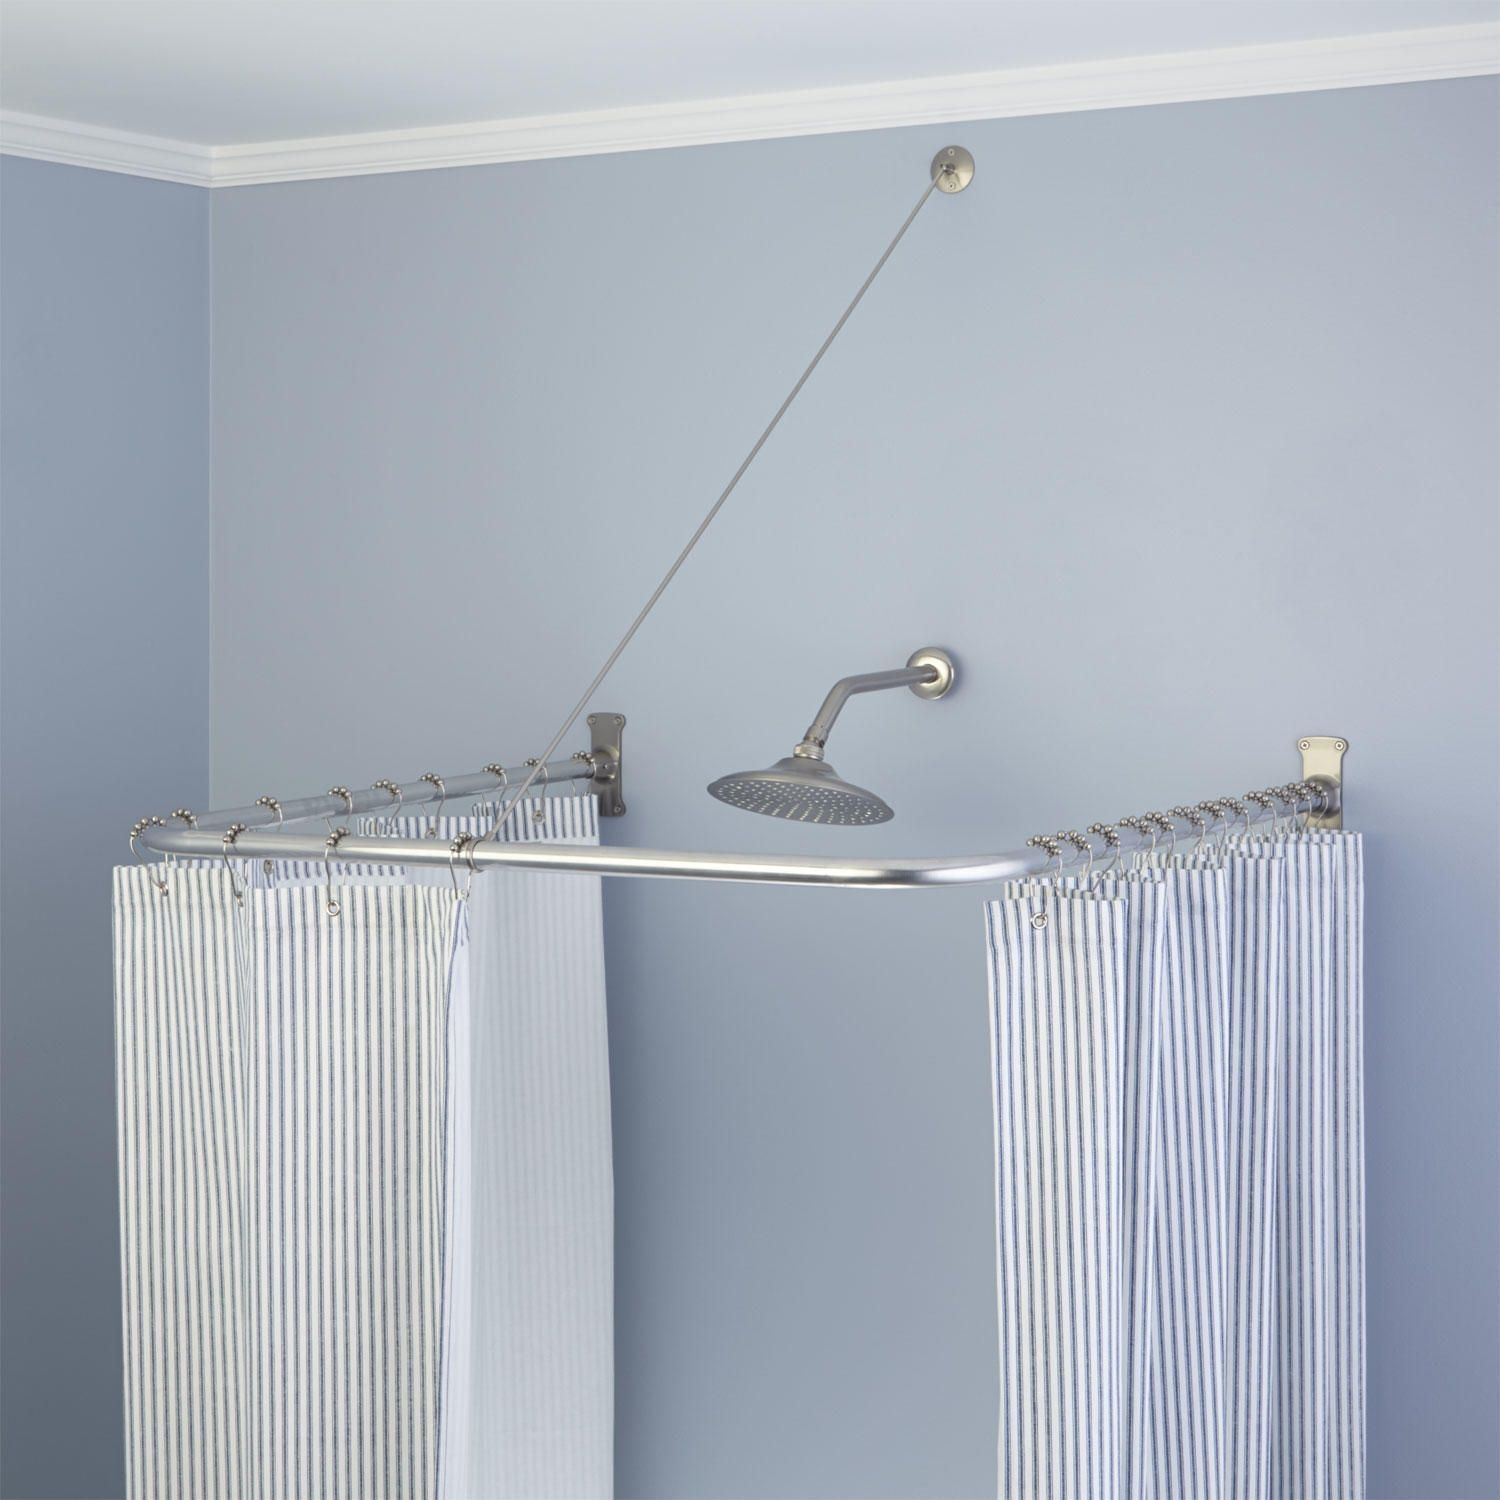 U Shaped Shower Curtain Rod Shower Curtain Rods Brushed Nickel In L Curtain Rods (View 18 of 25)